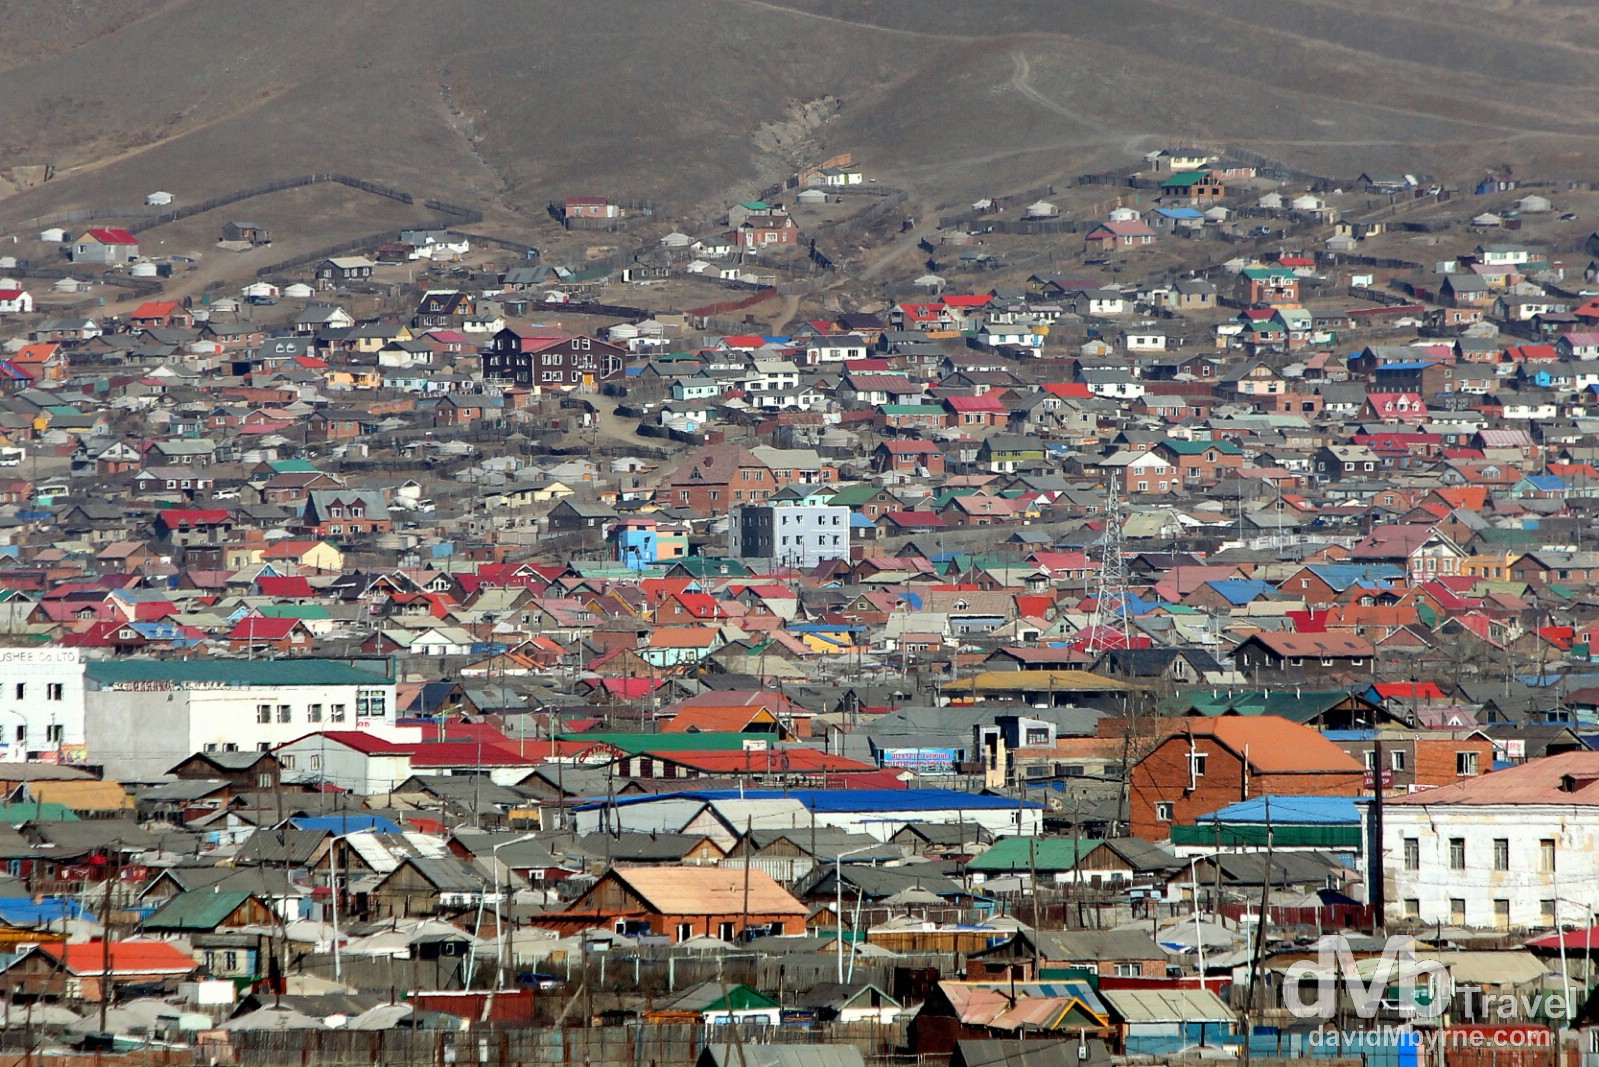 A section of Ulan Bator, Mongolia, as seen from Zaany Tolgoi, or Elephant's head, a hill overlooking the city. November 1st 2012.